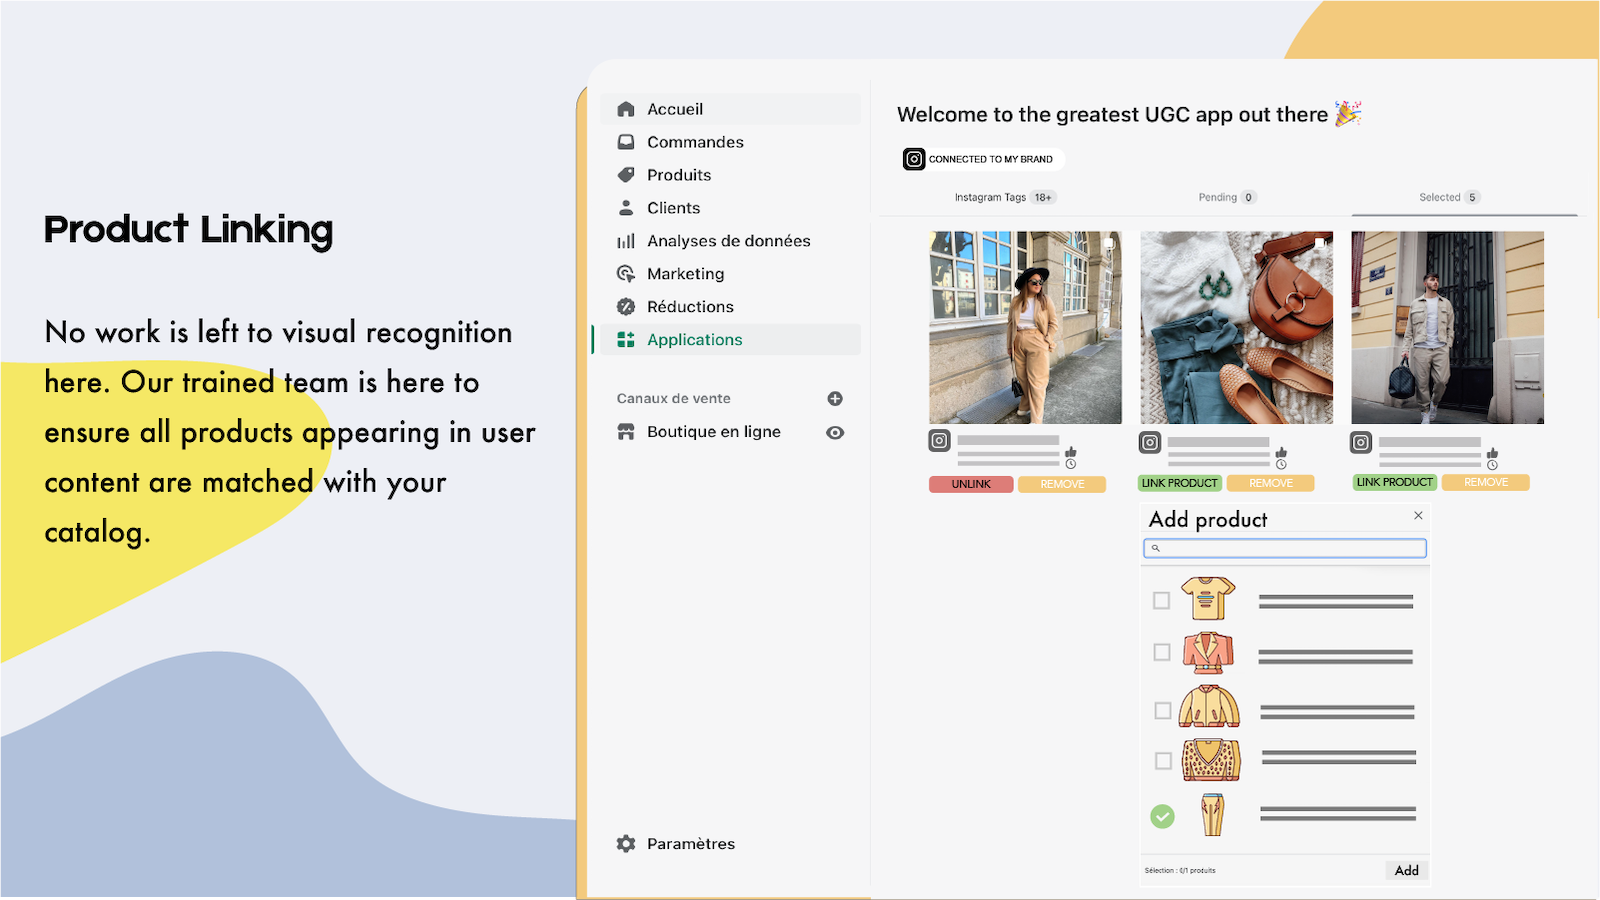 3. Product Linking  No work is left to visual recognition here. Our trained team is here to ensure all products appearing in user content are matched with your catalog.